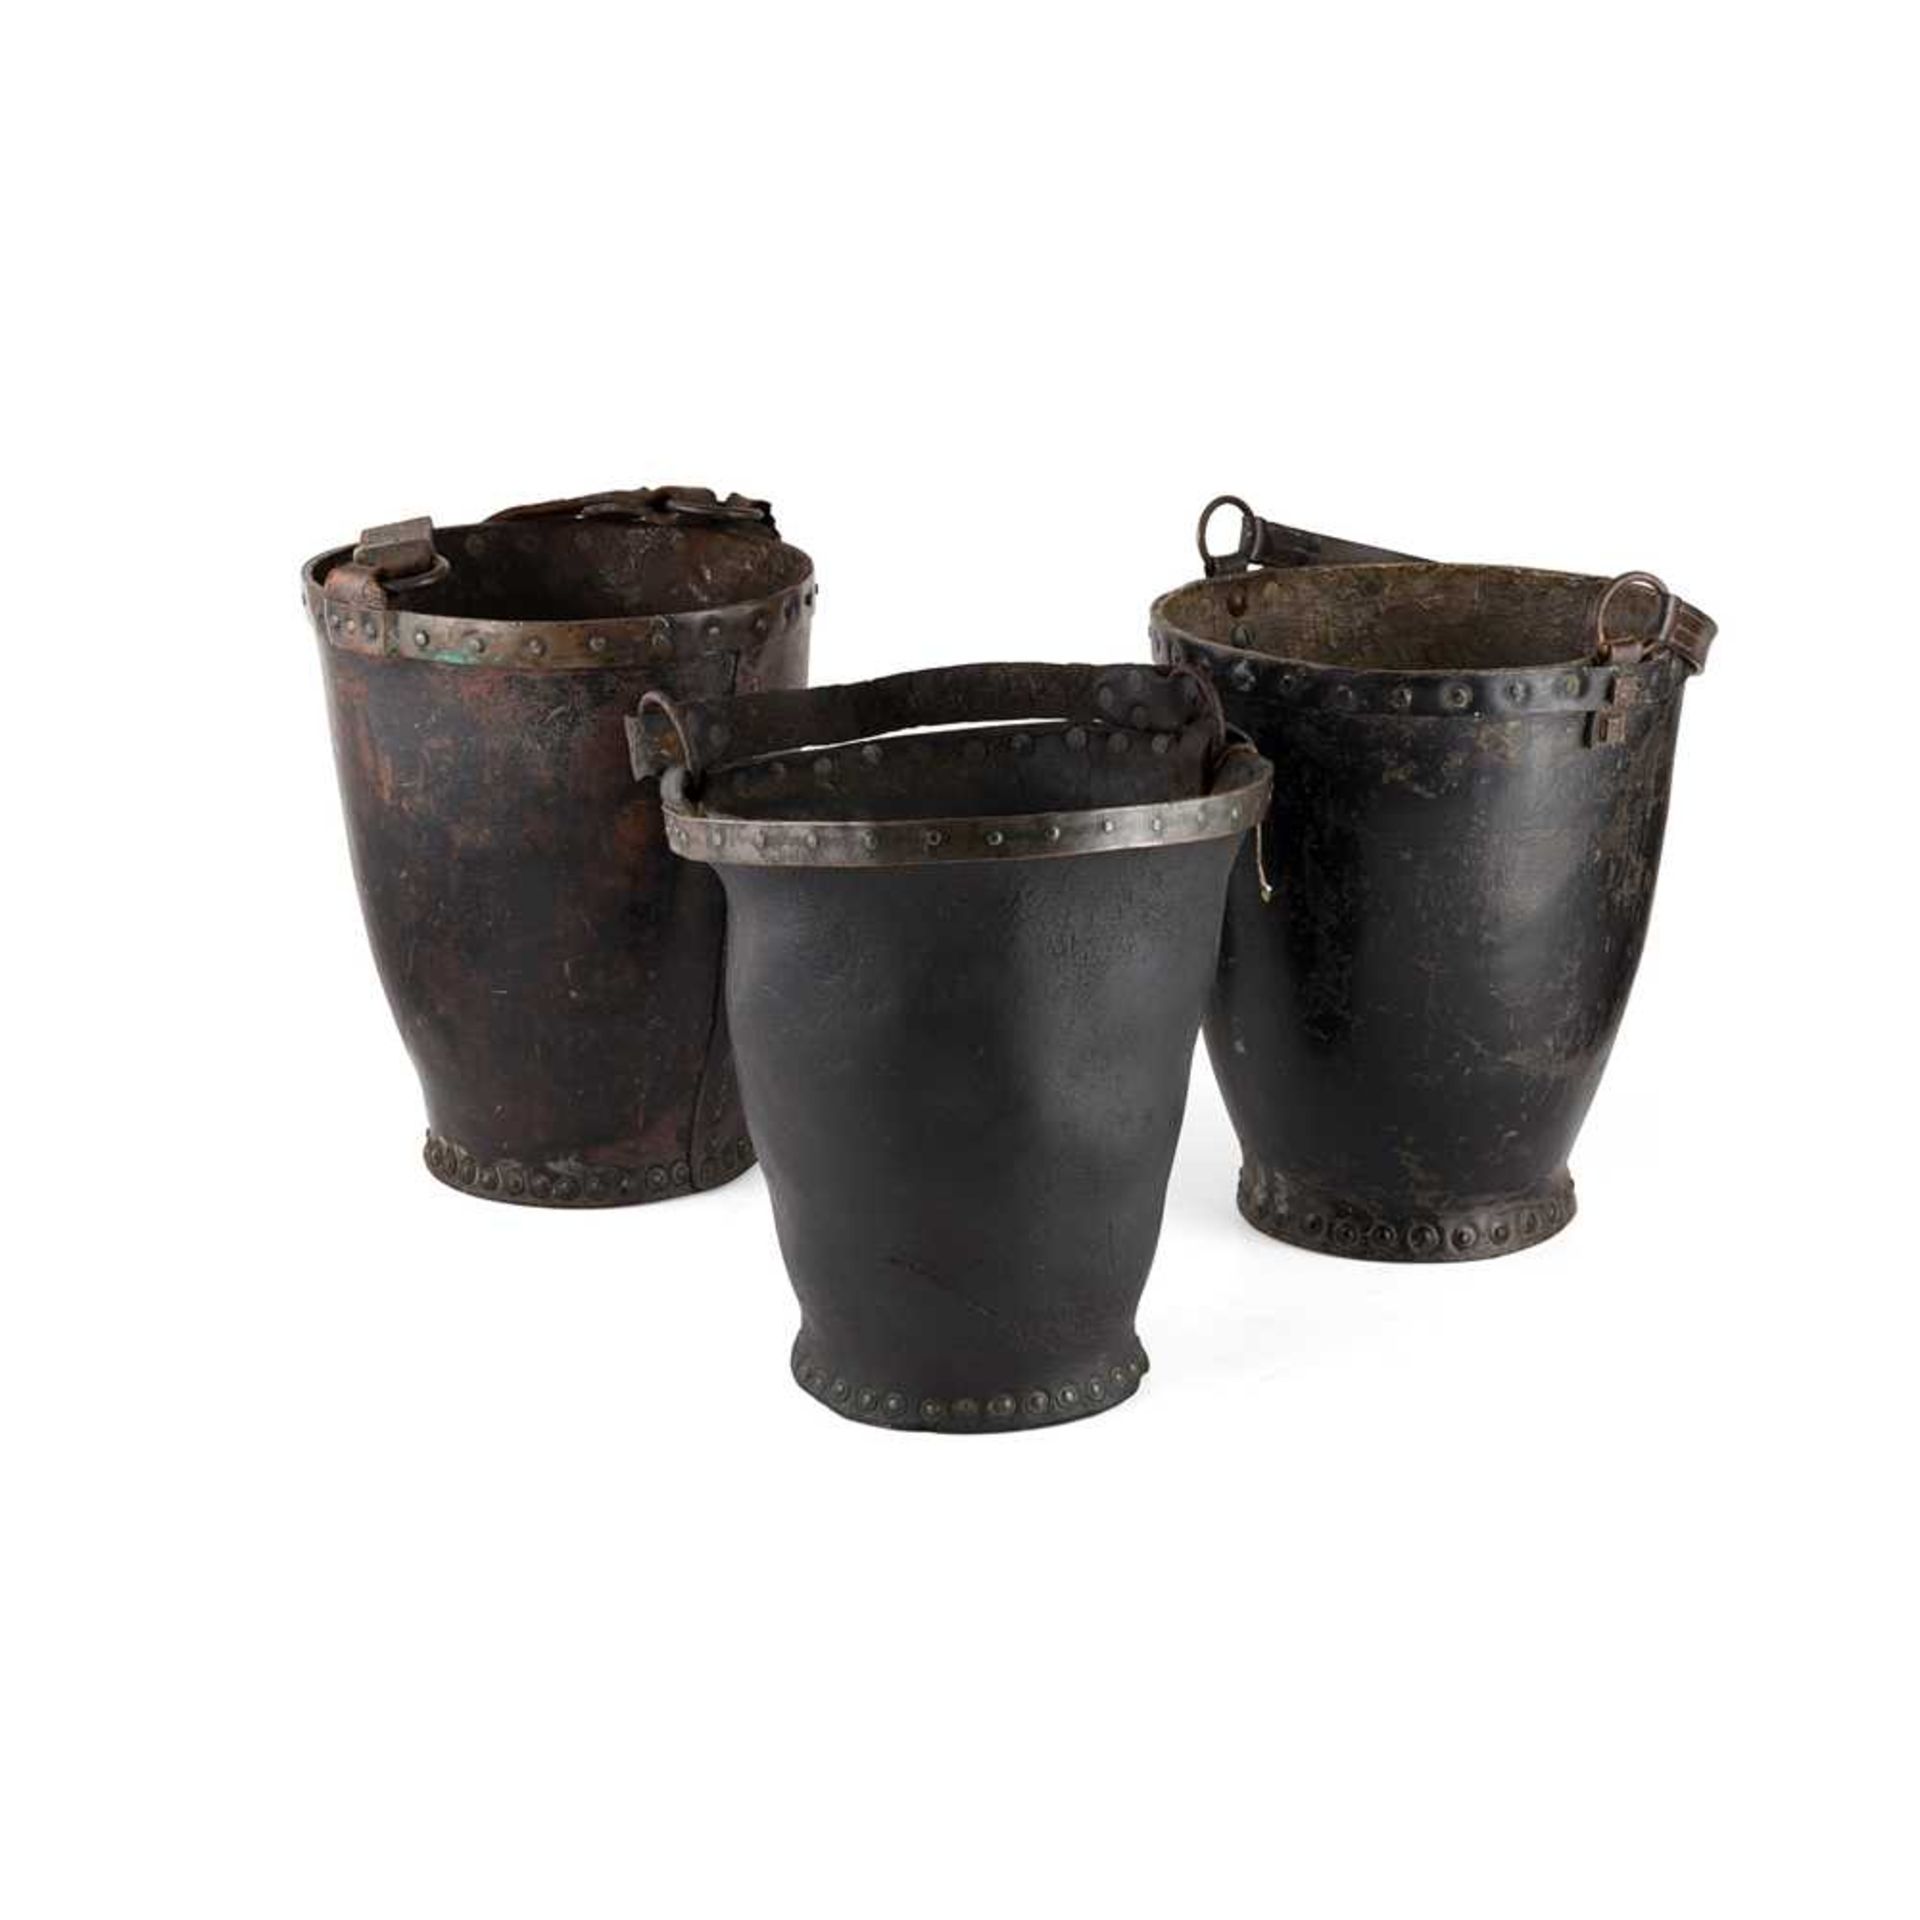 THREE LEATHER FIRE BUCKETS EARLY 19TH CENTURY